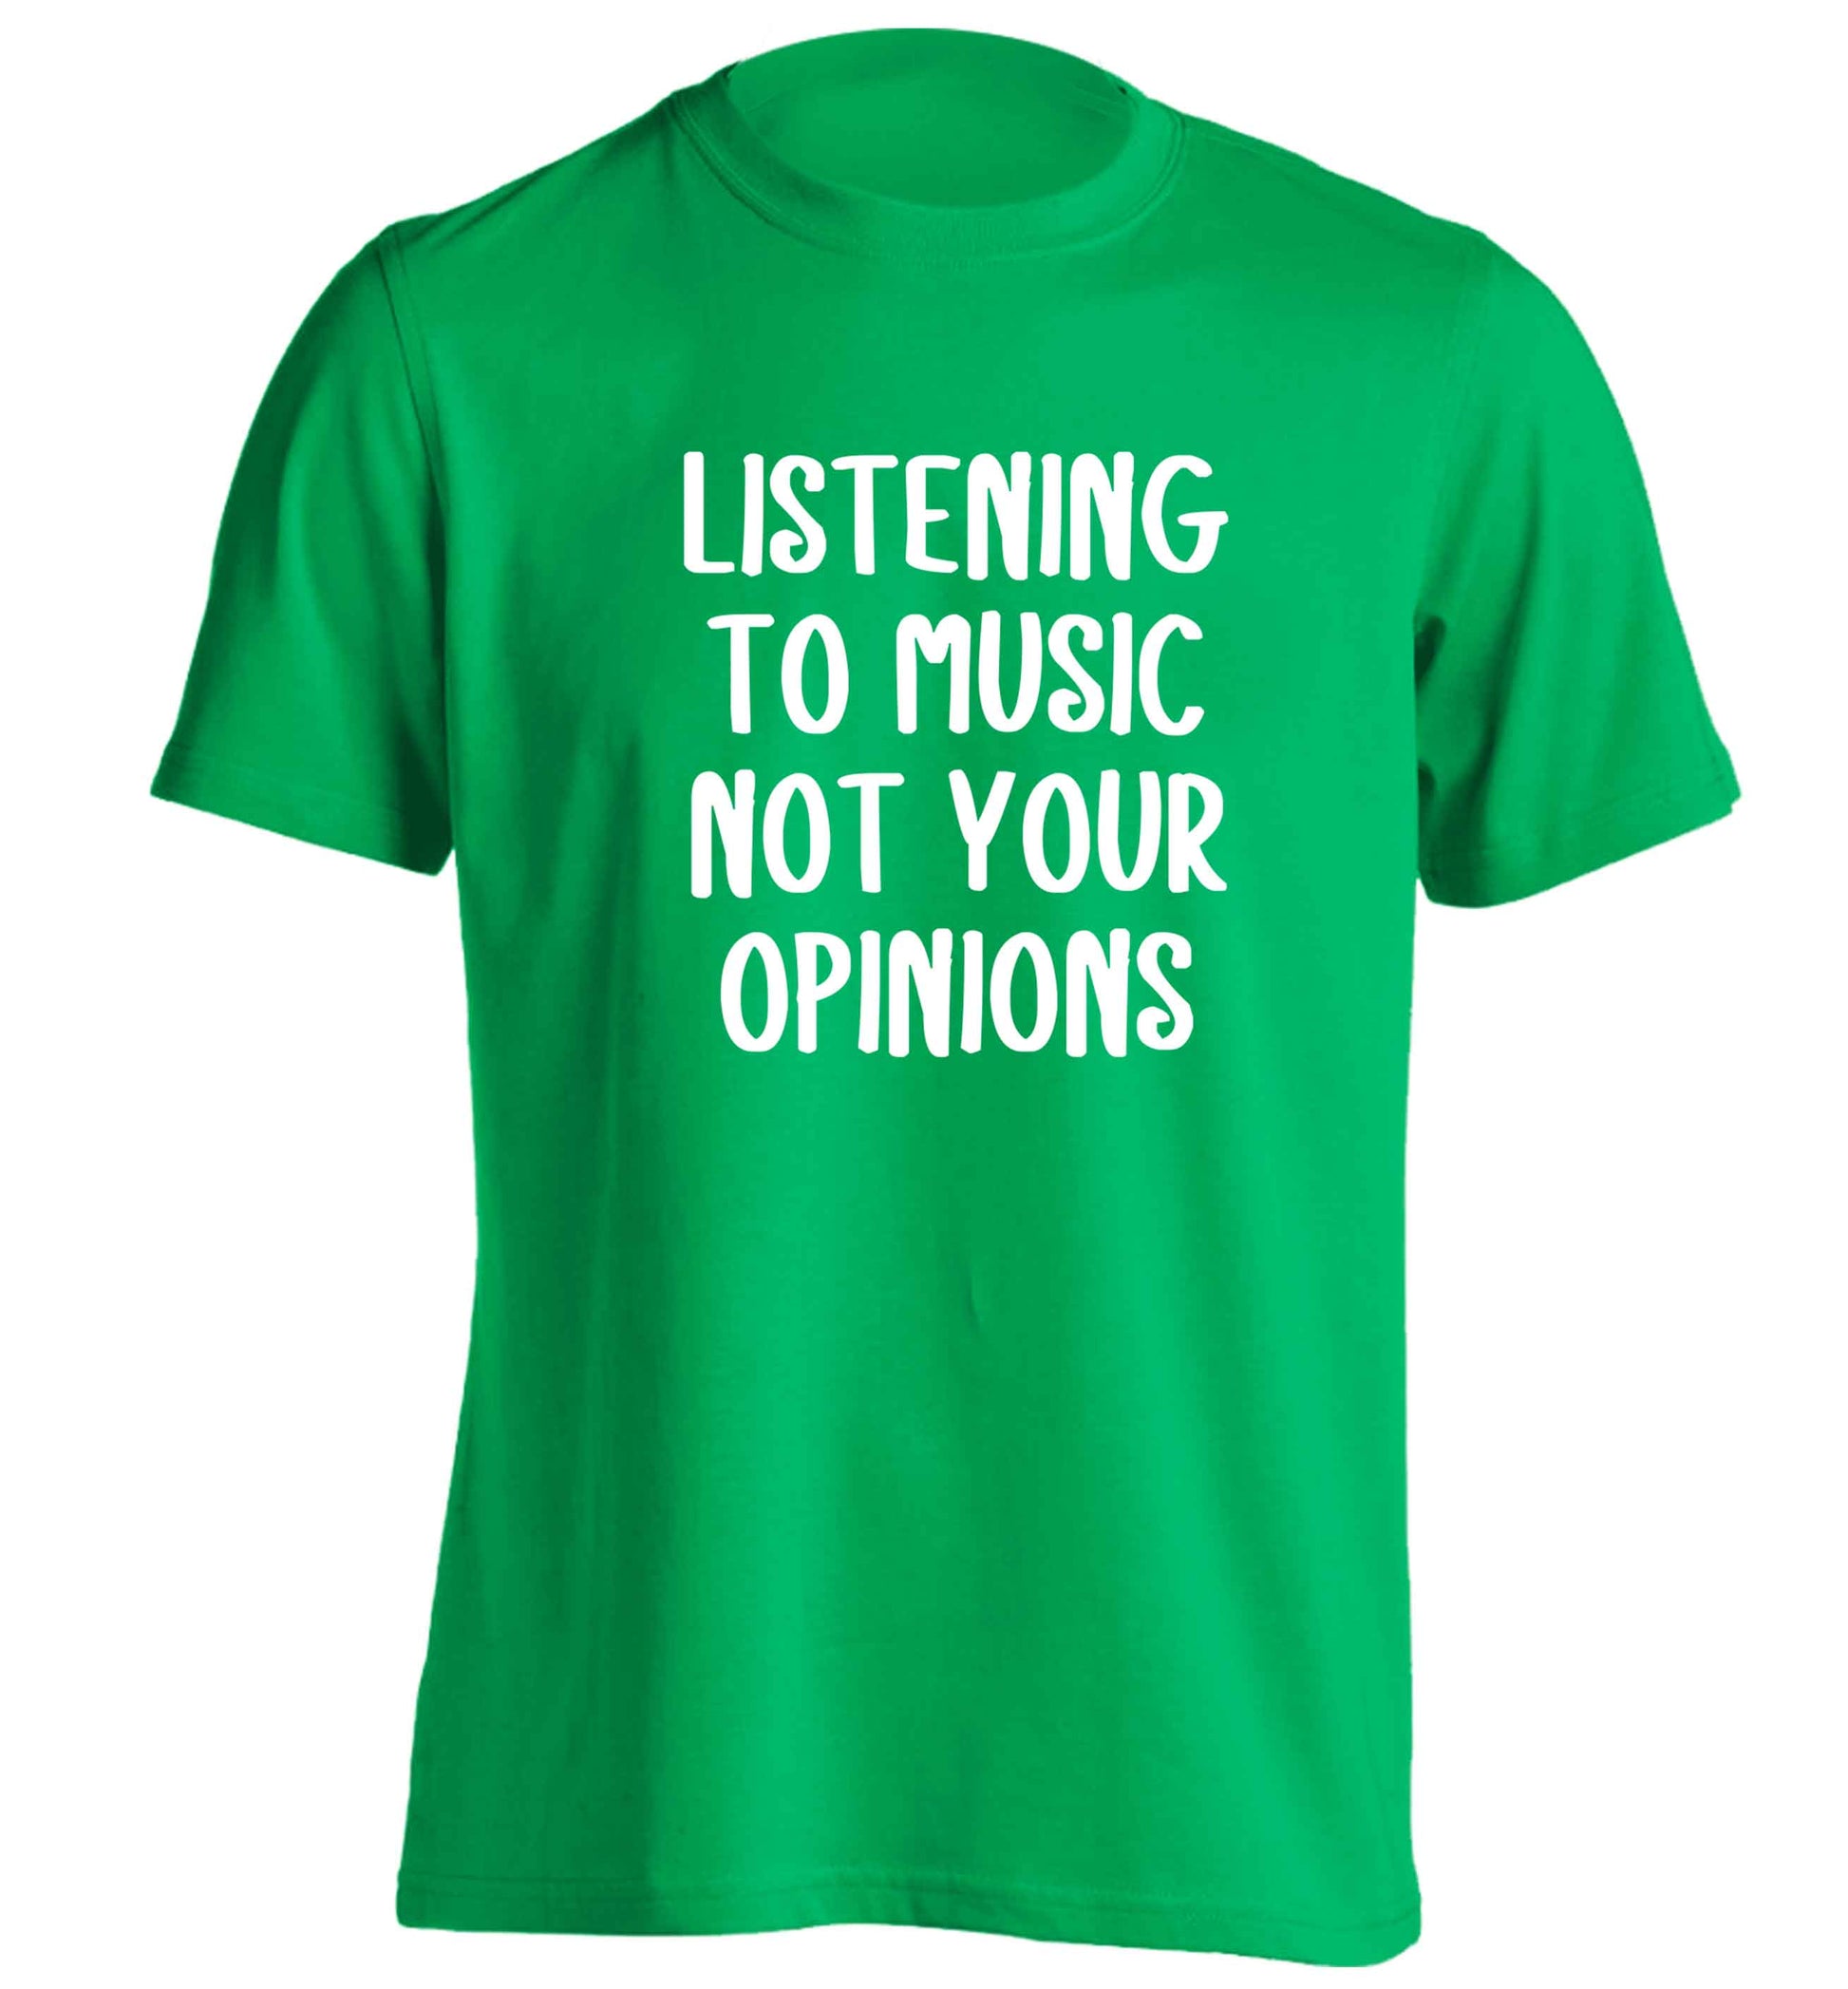 Listening to music not your opinions adults unisex green Tshirt 2XL